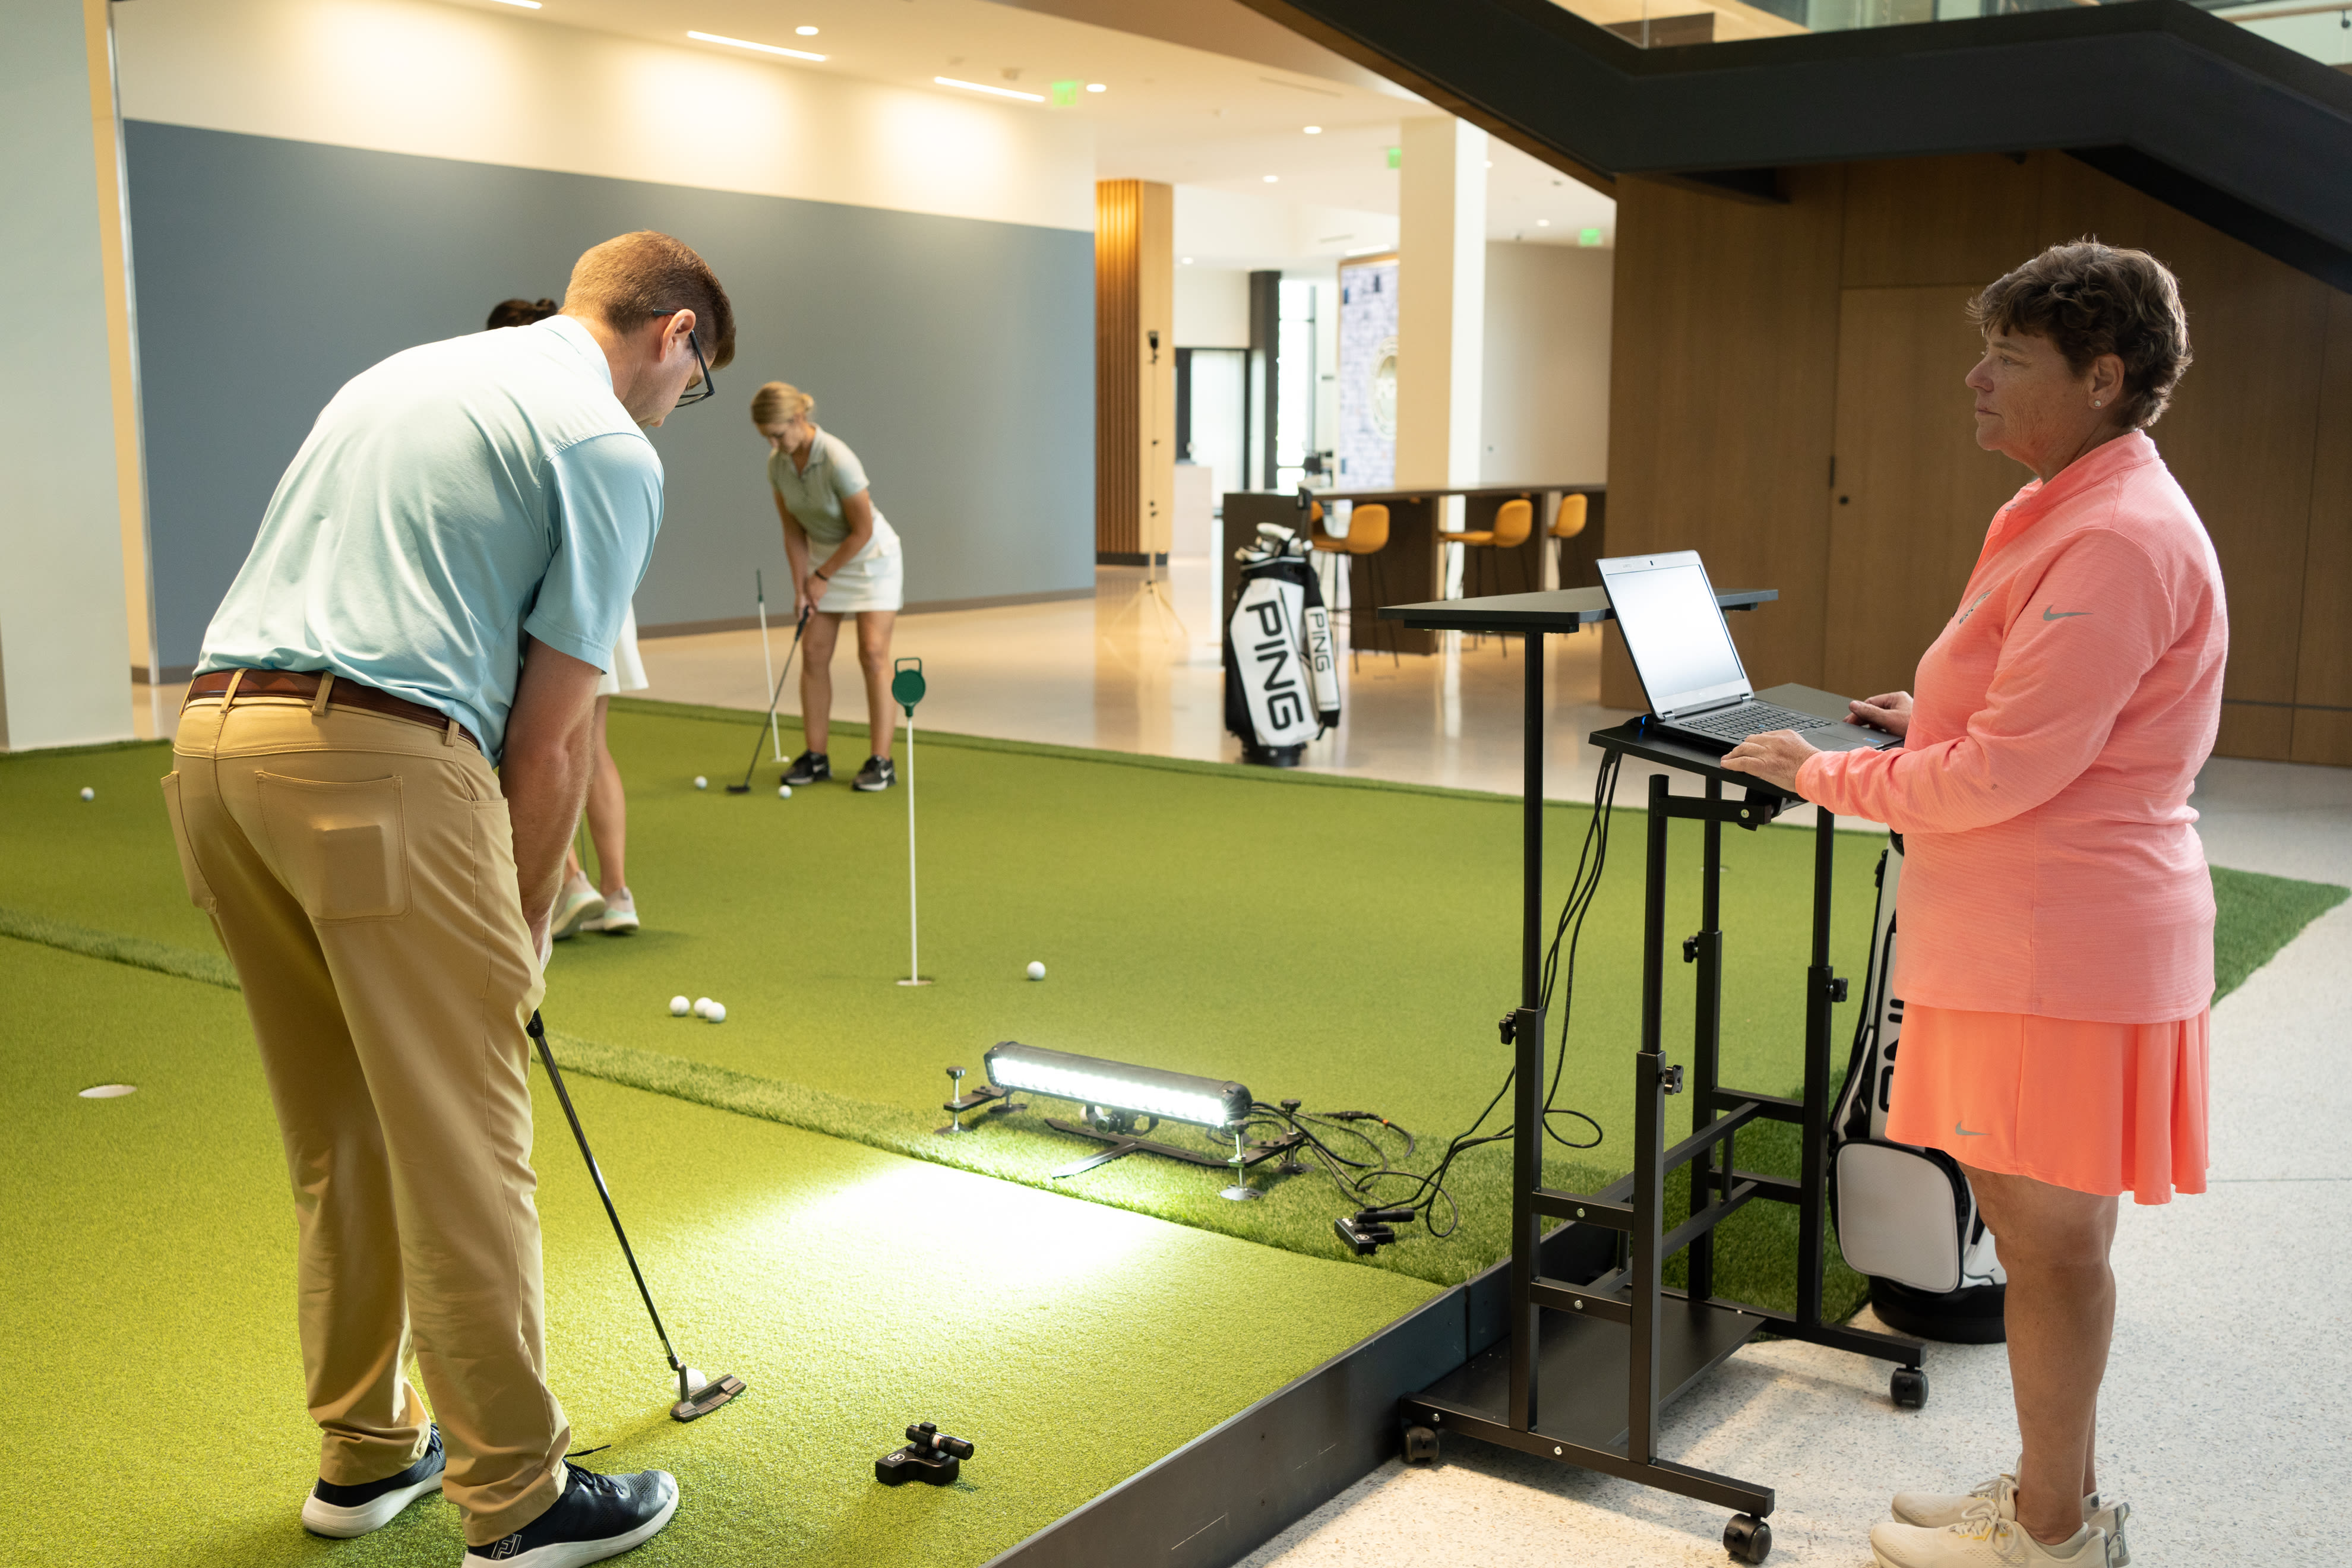 Attendees in the Putting Lab at PGA Frisco Campus on August 17, 2022 in Frisco, Texas. (Photo by The Marmones LLC/PGA of America)